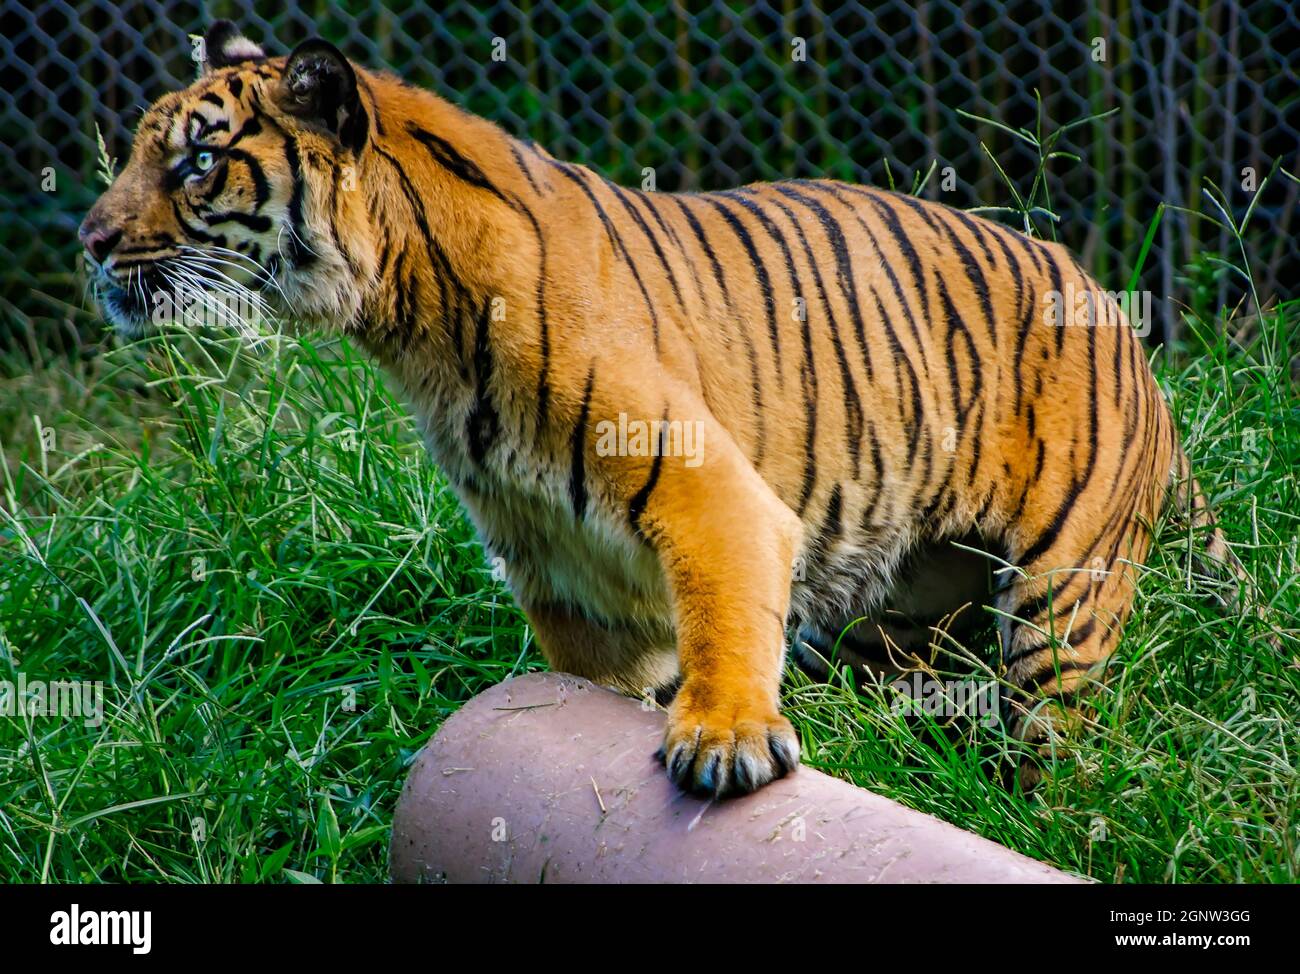 A Sumatran tiger (Panthera tigris sumatrae) plays with an enrichment toy at the Memphis Zoo, Sept. 8, 2015, in Memphis, Tennessee. Stock Photo